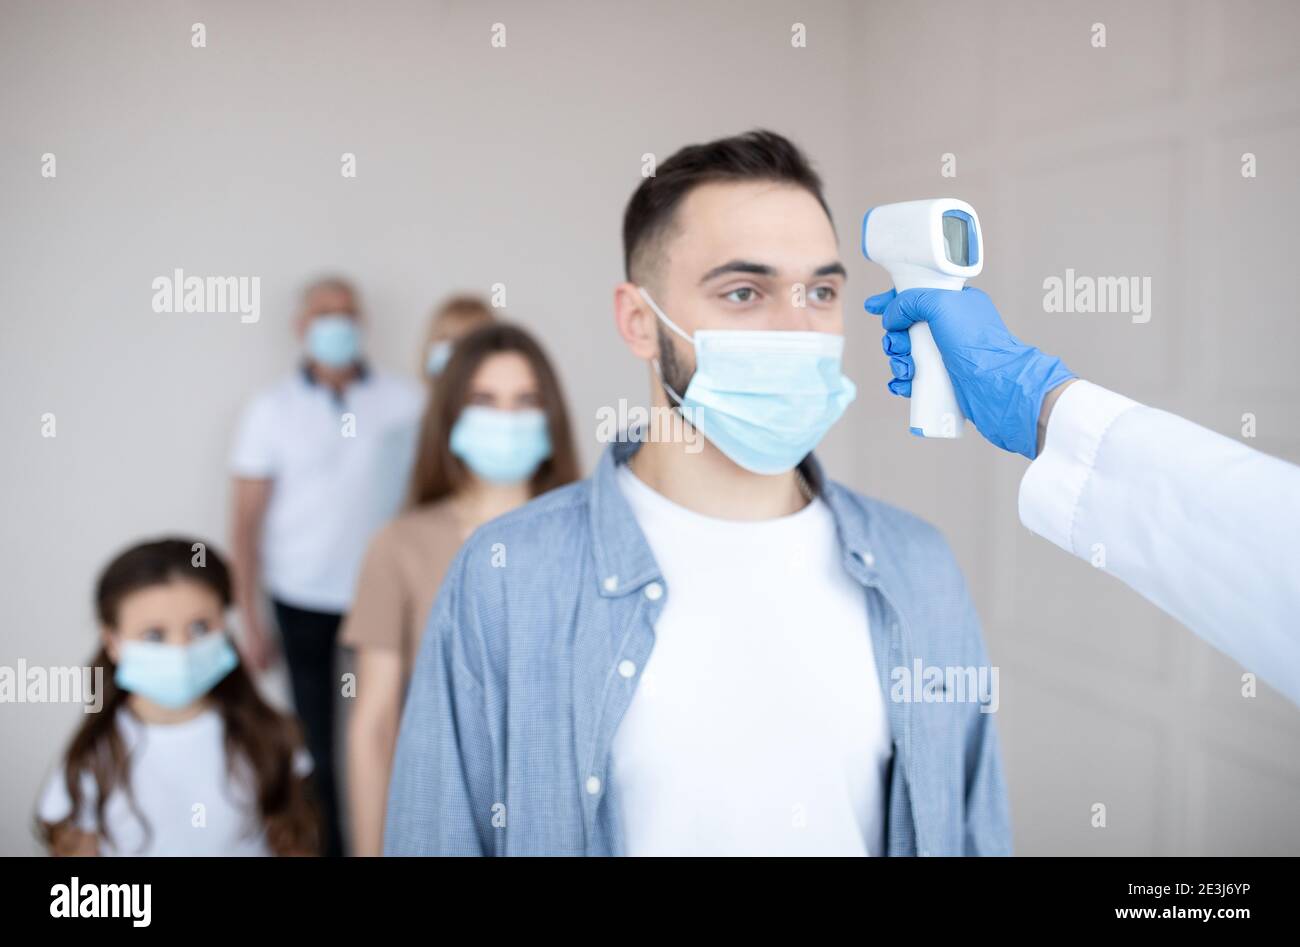 Medical worker checking young man's temperature with infrared thermometer at hospital. Coronavirus vaccination Stock Photo